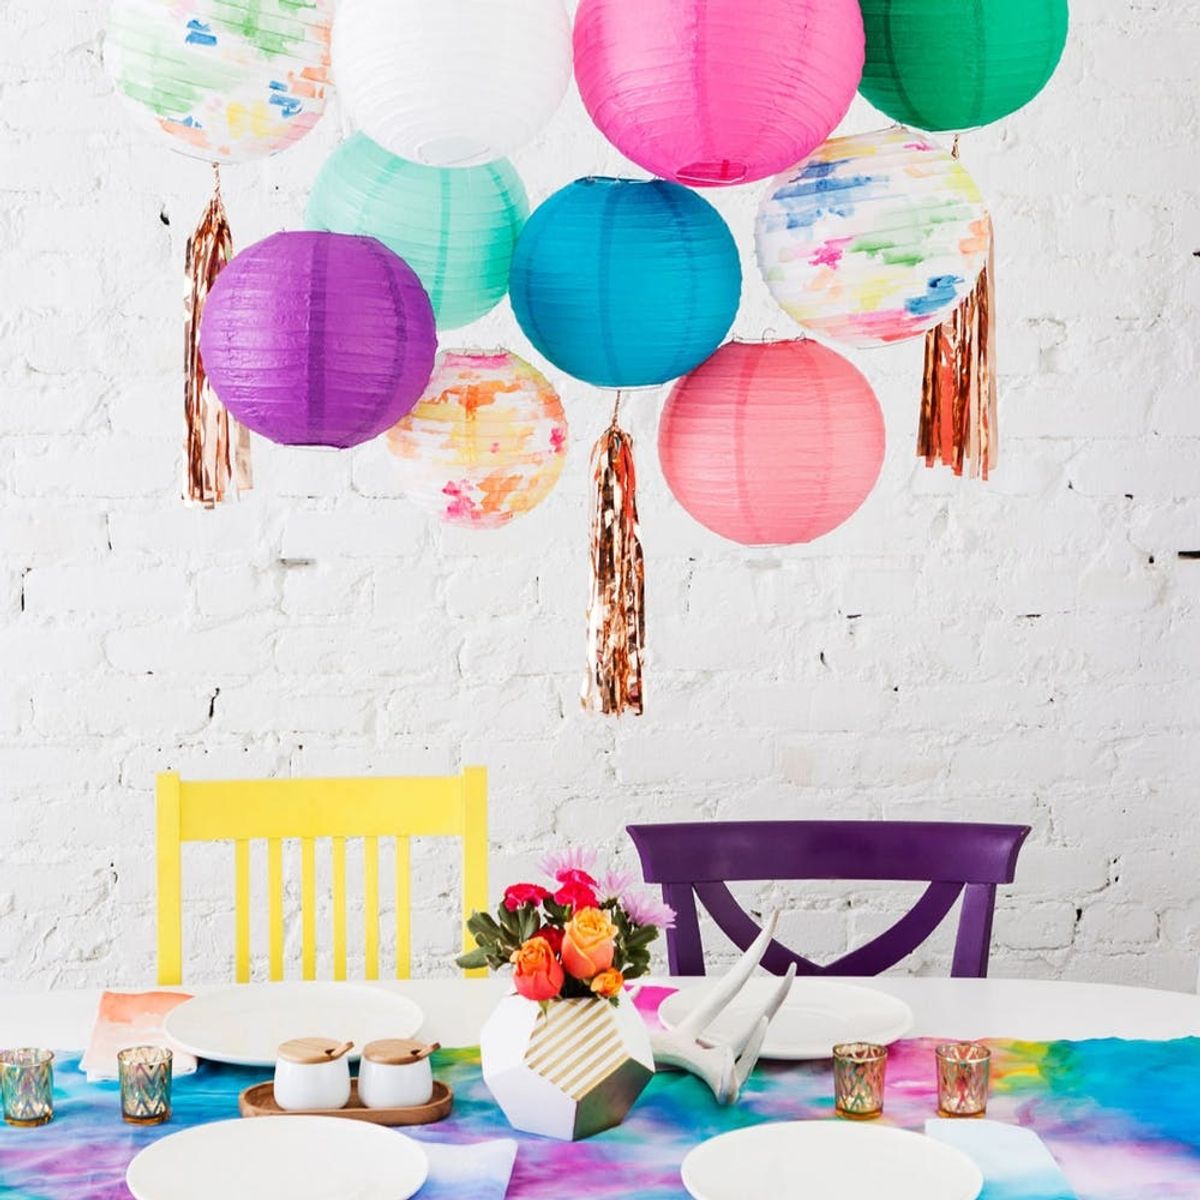 Use Watercolors to DIY These Colorful Party Lanterns